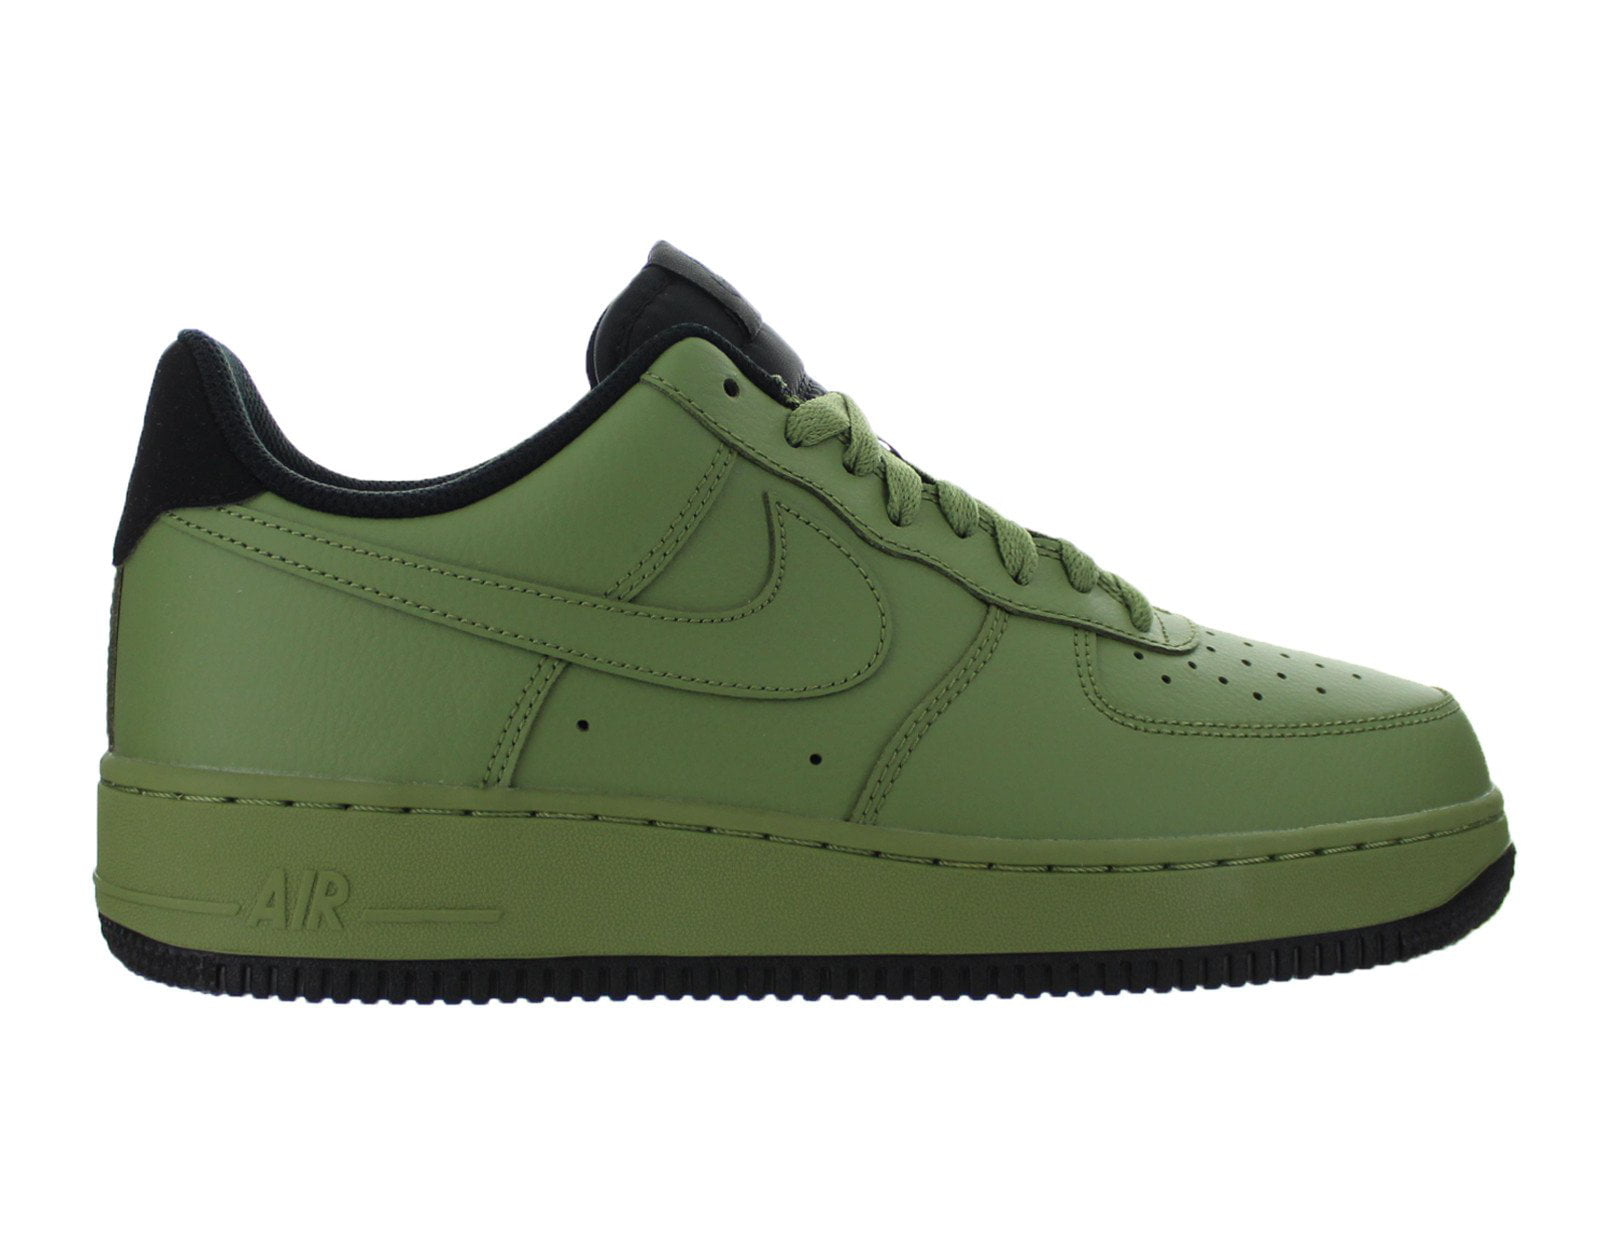 Nike Air Force 1 Custom Sneakers Low Two Tone Army Military Green White  Shoes 